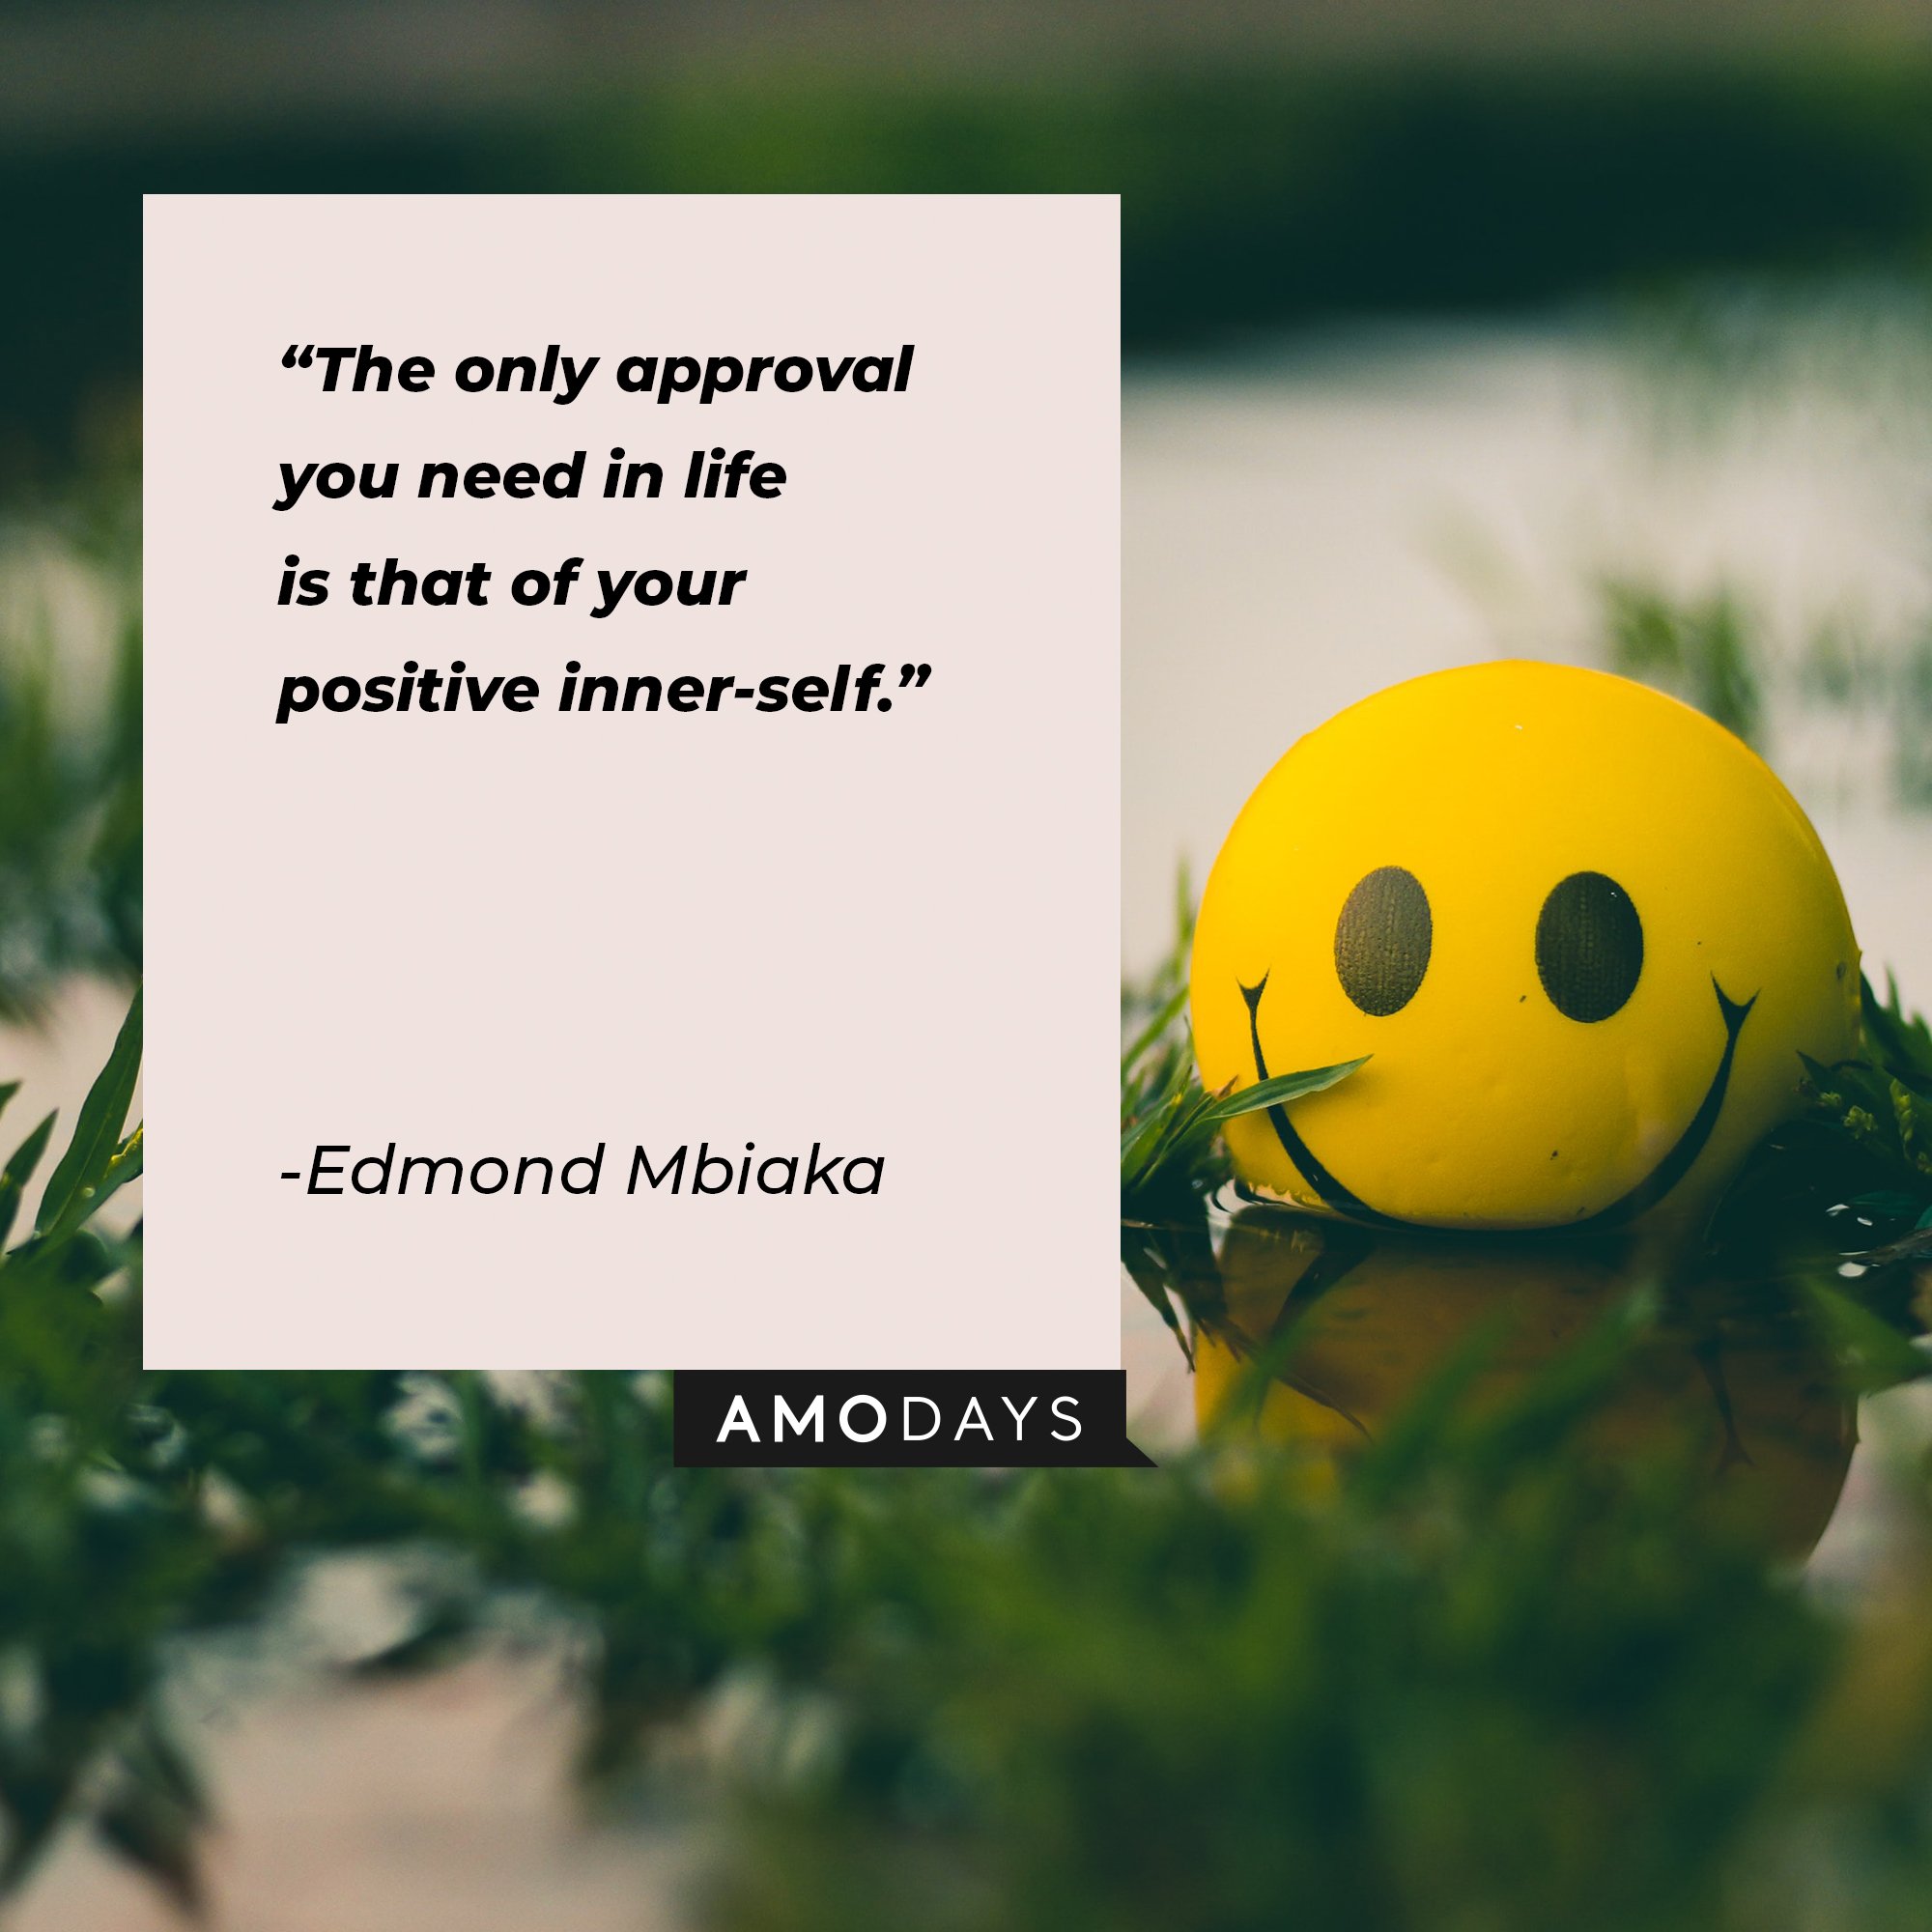 Edmond Mbiaka’s quote: "The only approval you need in life is that of your positive inner-self." | Image: AmoDays 